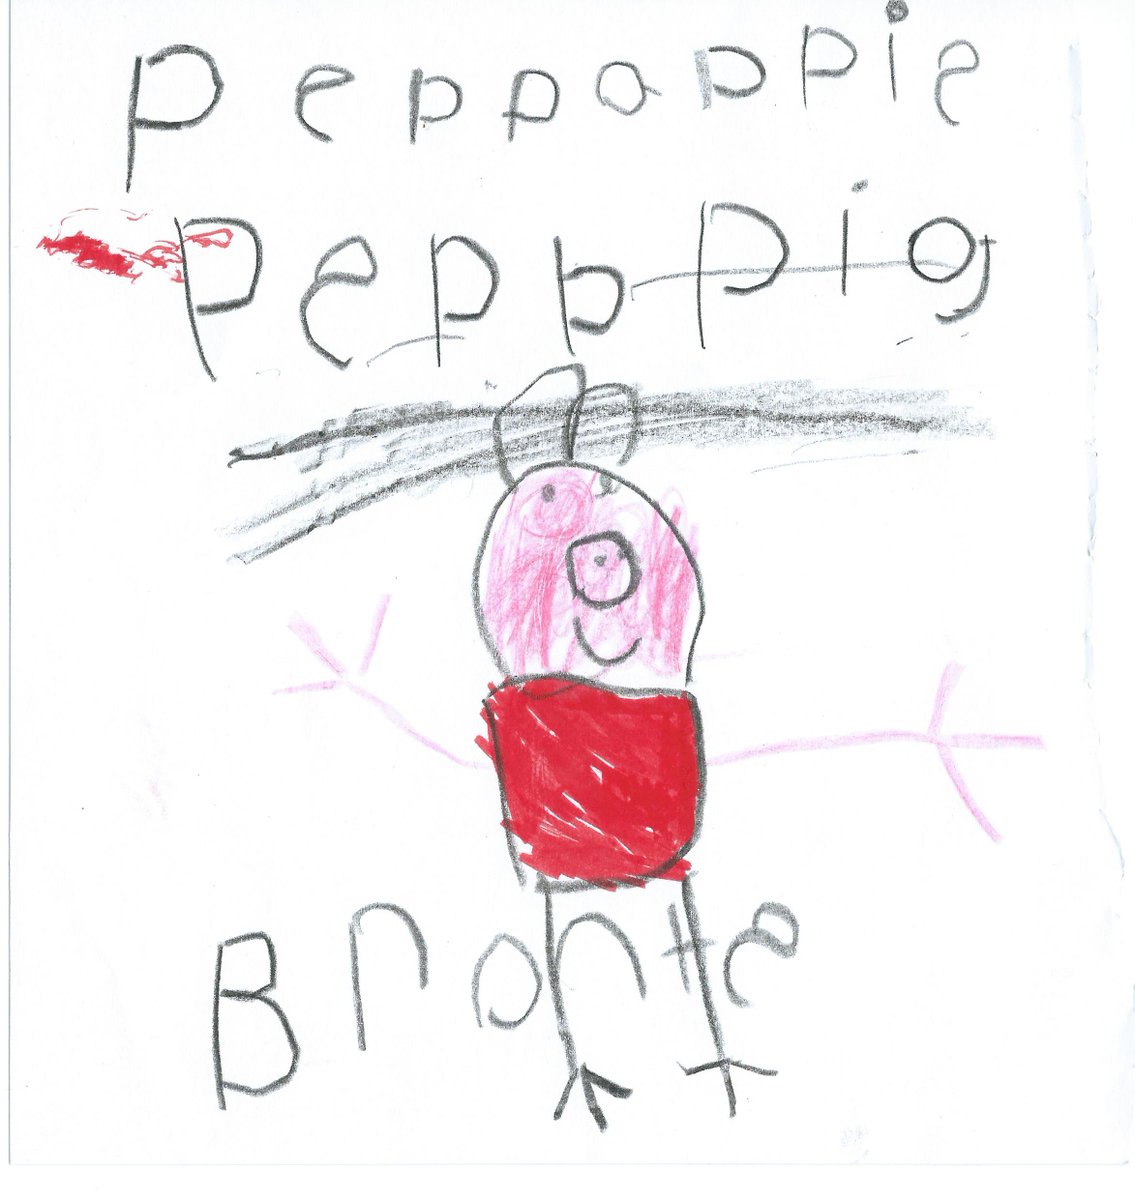 We ❤️ receiving mail from Peppa fans. This wonderful drawing was sent in by Bronte, aged 4 from Australia 😃